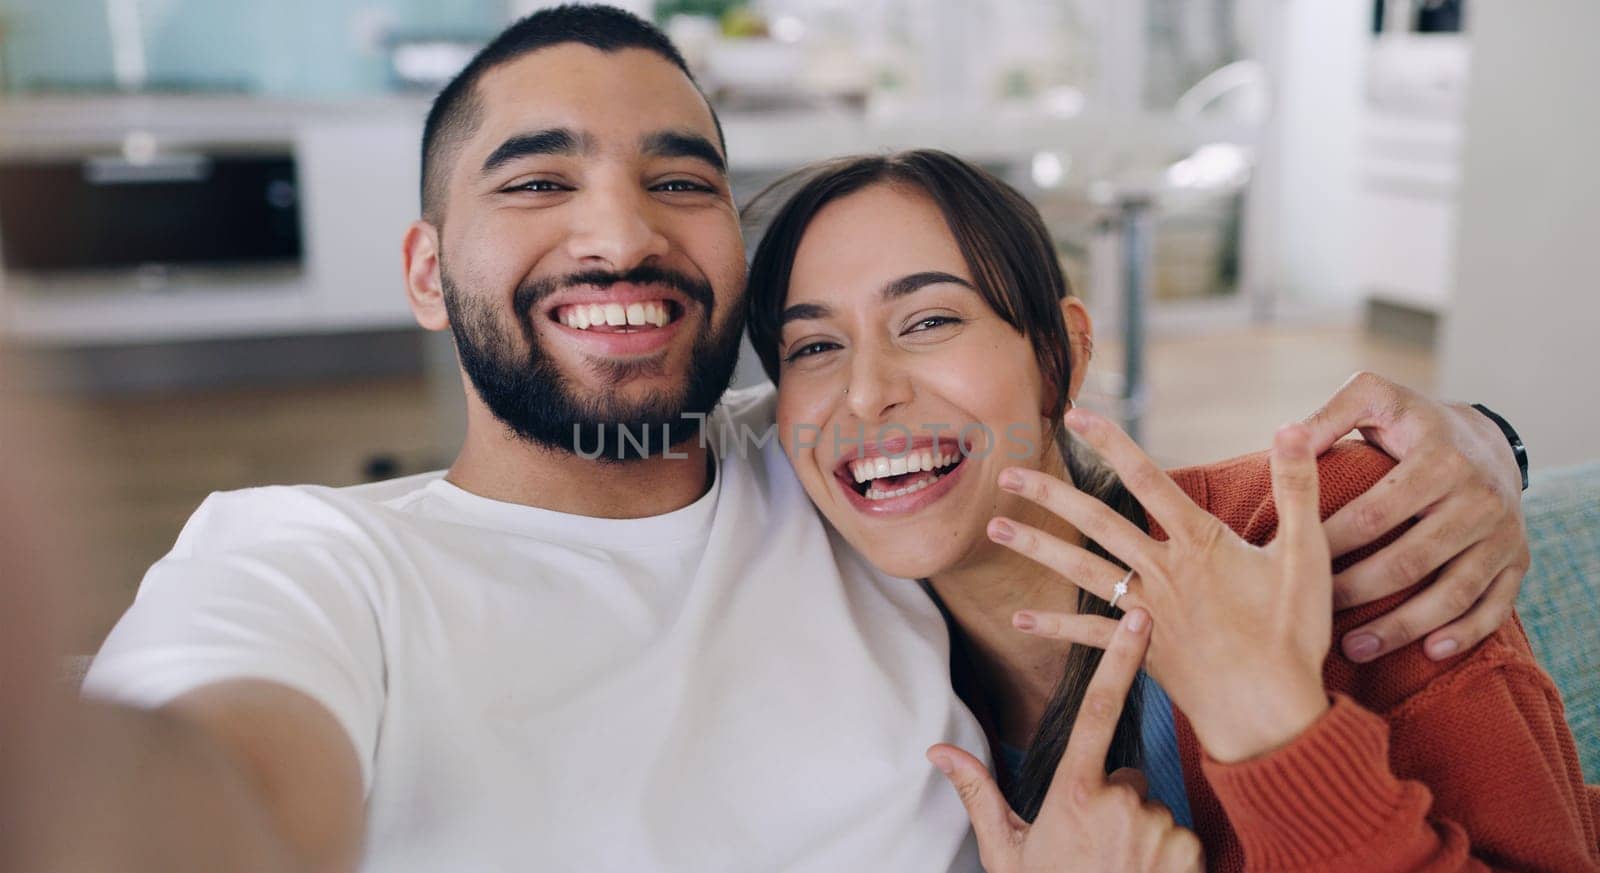 Couple, selfie and engagement ring in living room portrait for happiness, romance and love on social media app. Man, woman and excited for marriage proposal, offer and celebration with smile on blog.